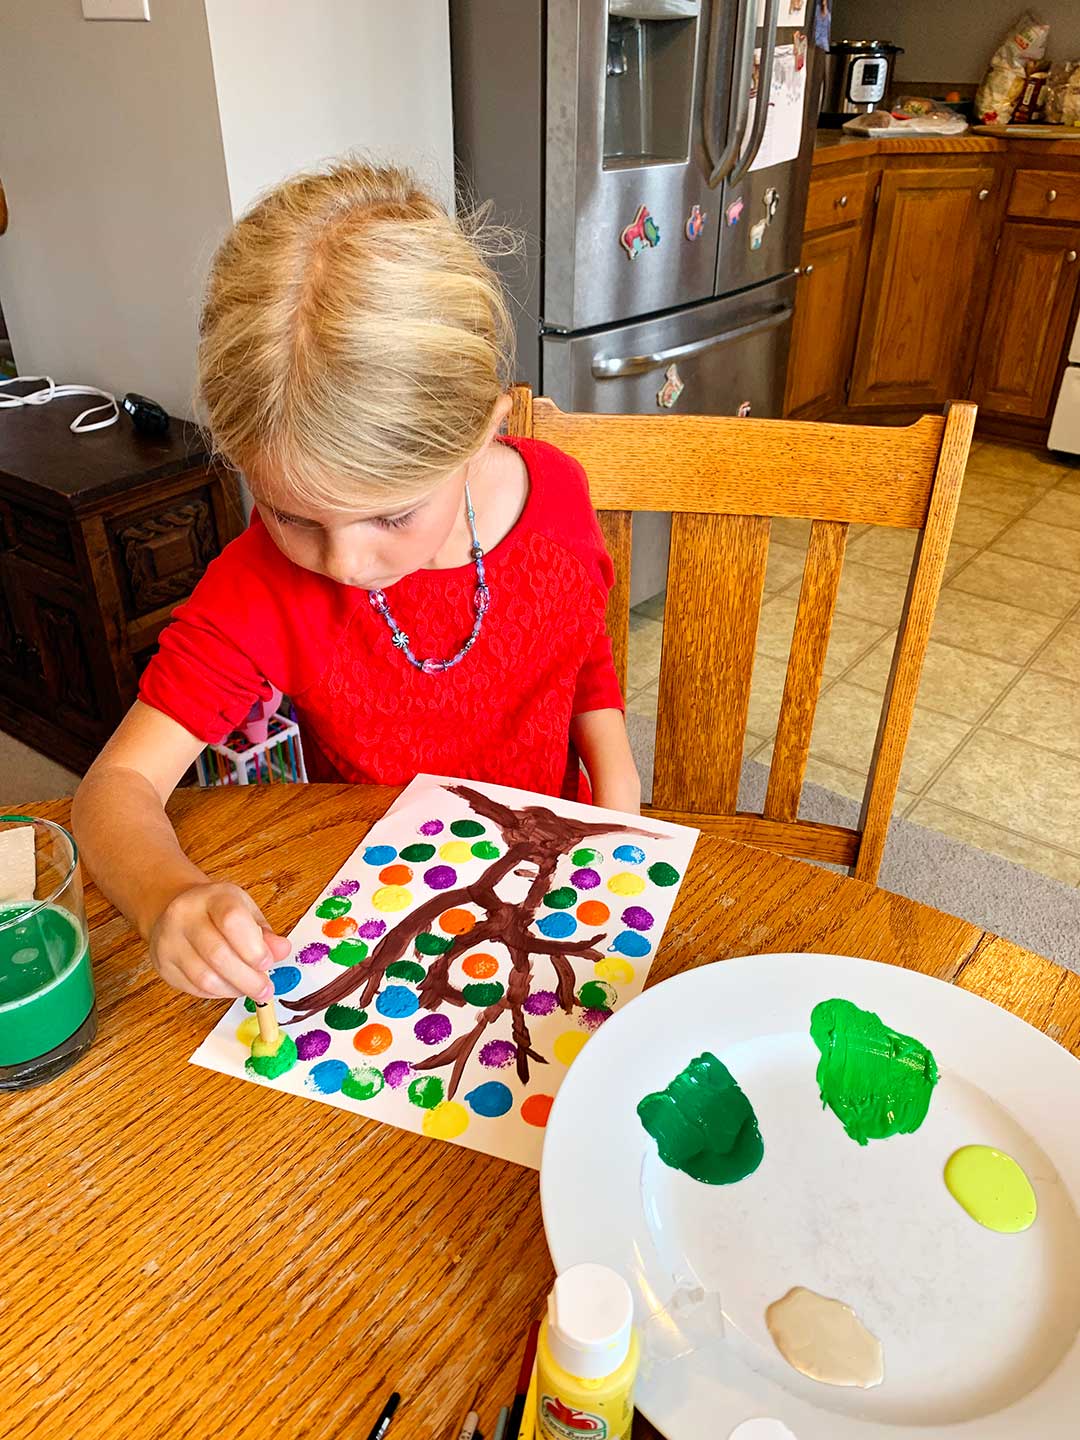 Young girl with blonde hair and red shirt stamps leaves on her tree using a circular stamp tool and green paint.